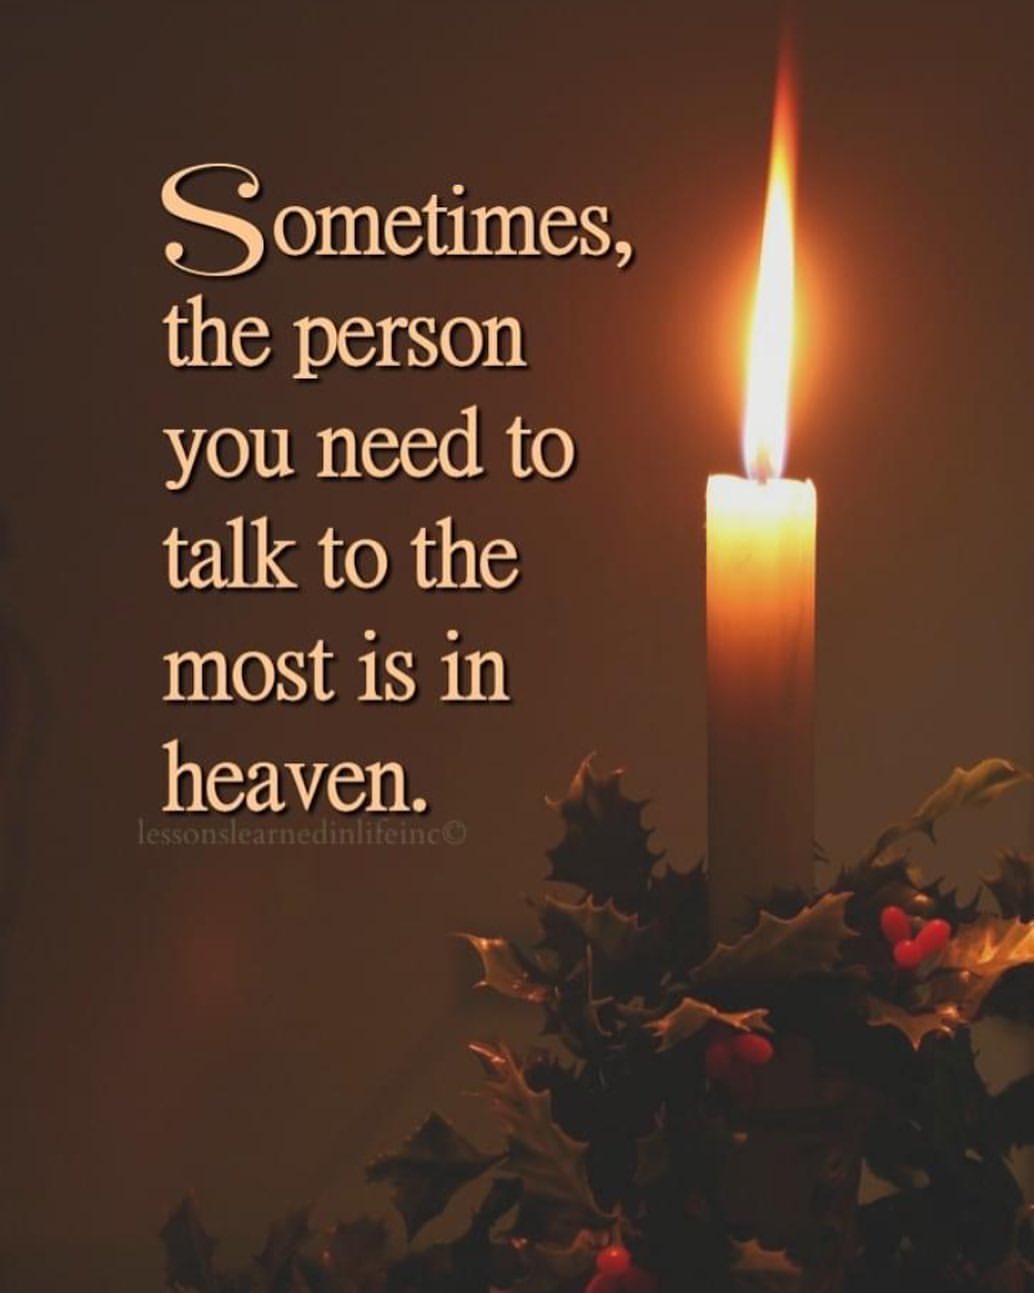 Sometimes, the person you need to talk to the most is in heaven.